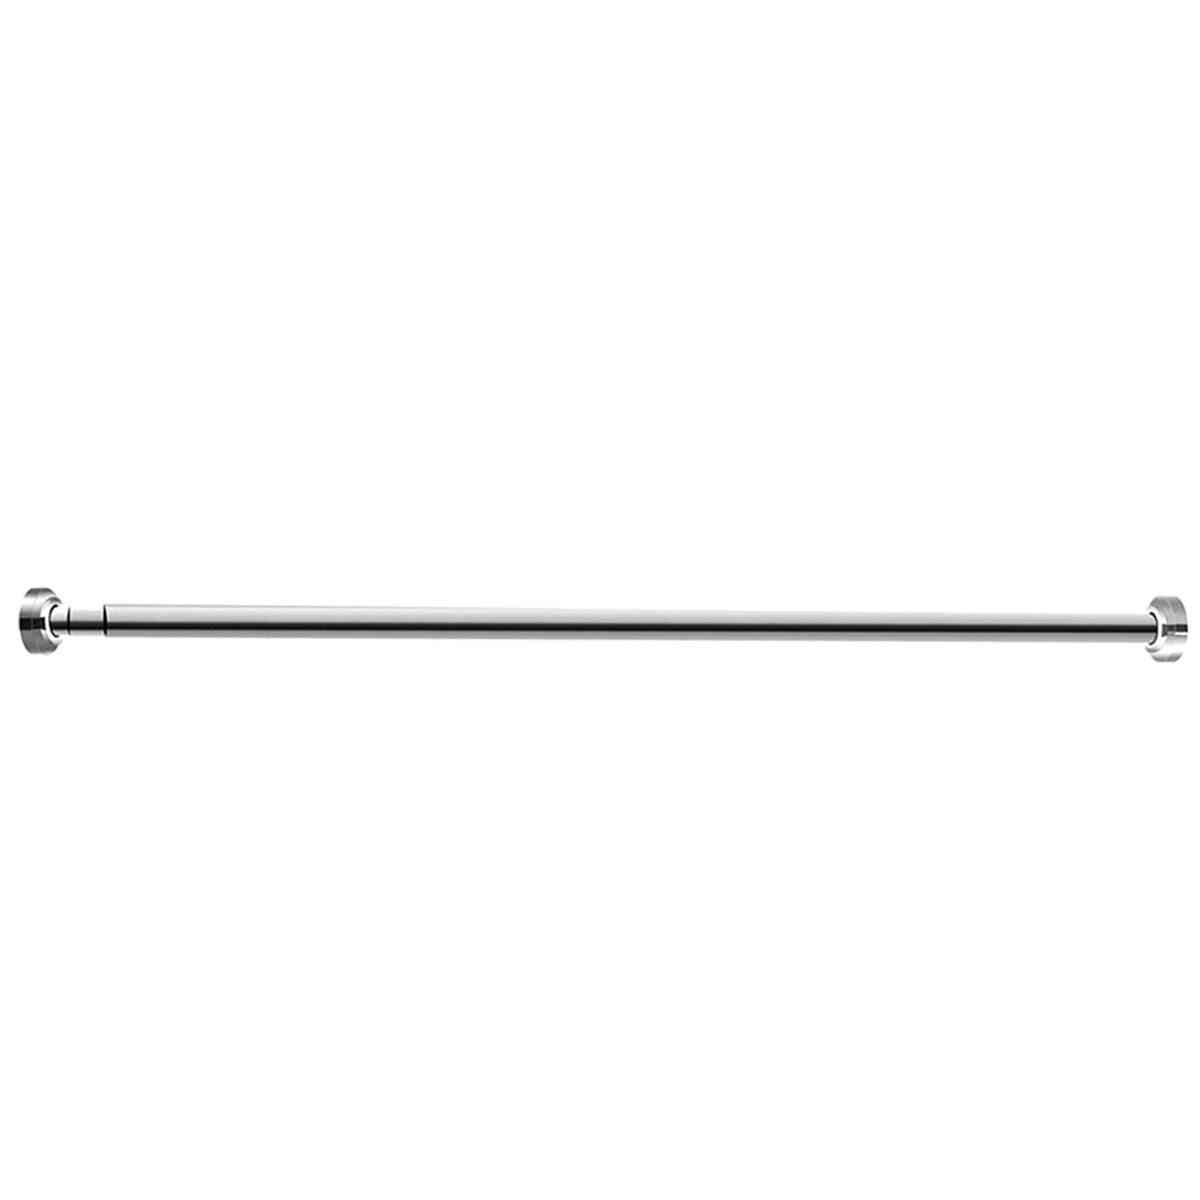 Shower Curtain Pole Adjustable Stainless Steel Spring Tension Rod Rail